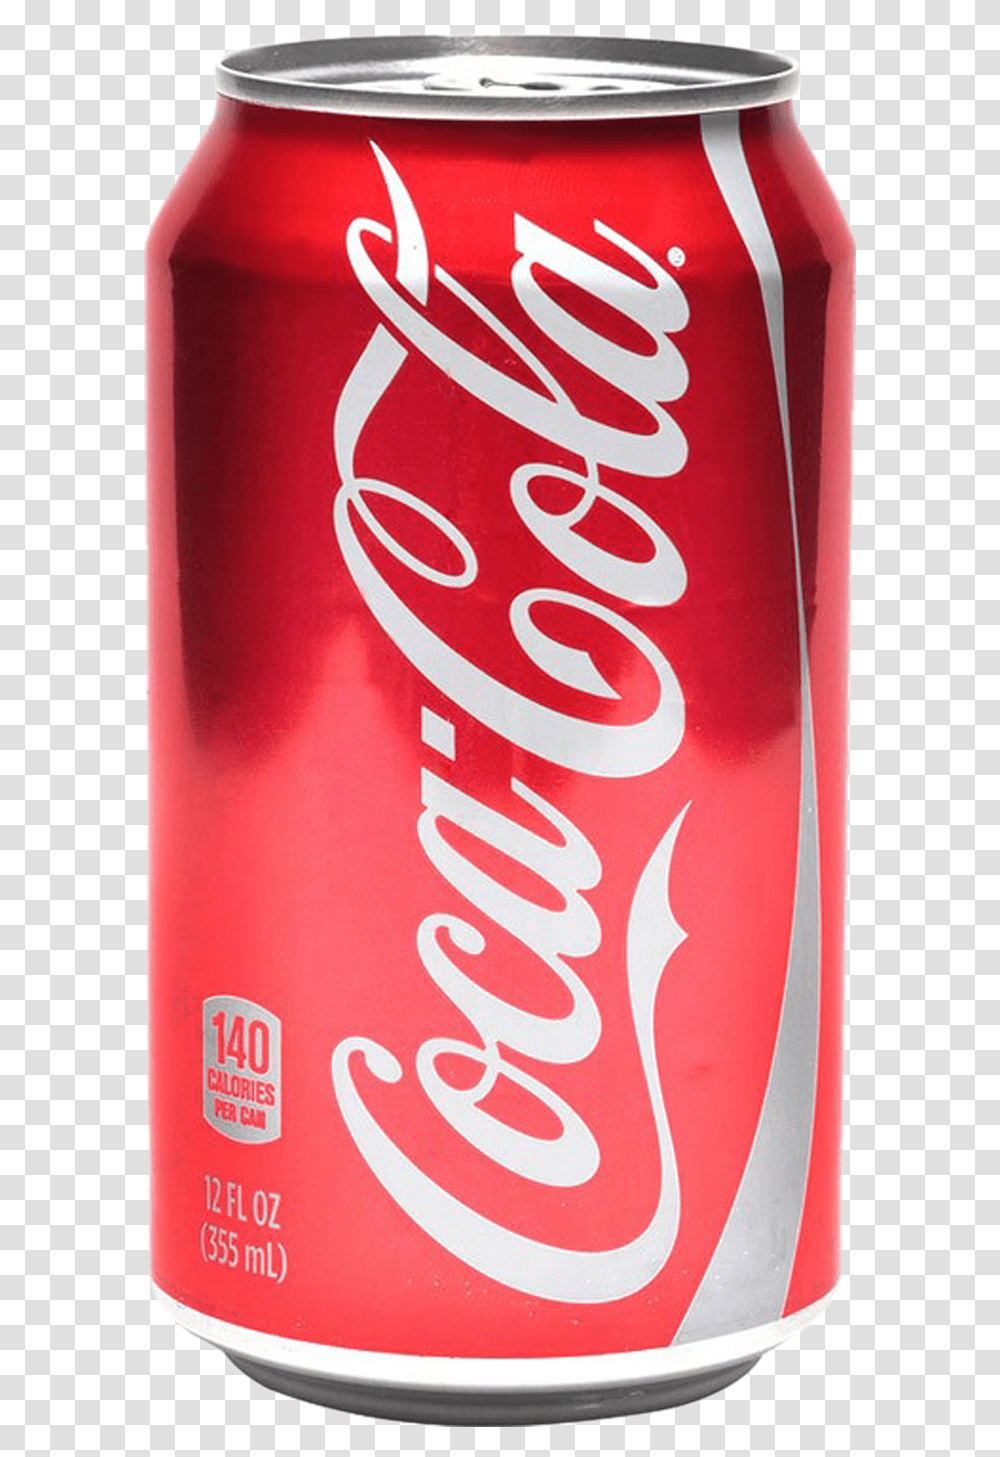 Coca Cola Can Images Collection For Free Download Coke Bottle, Beverage, Drink, Soda, Tin Transparent Png